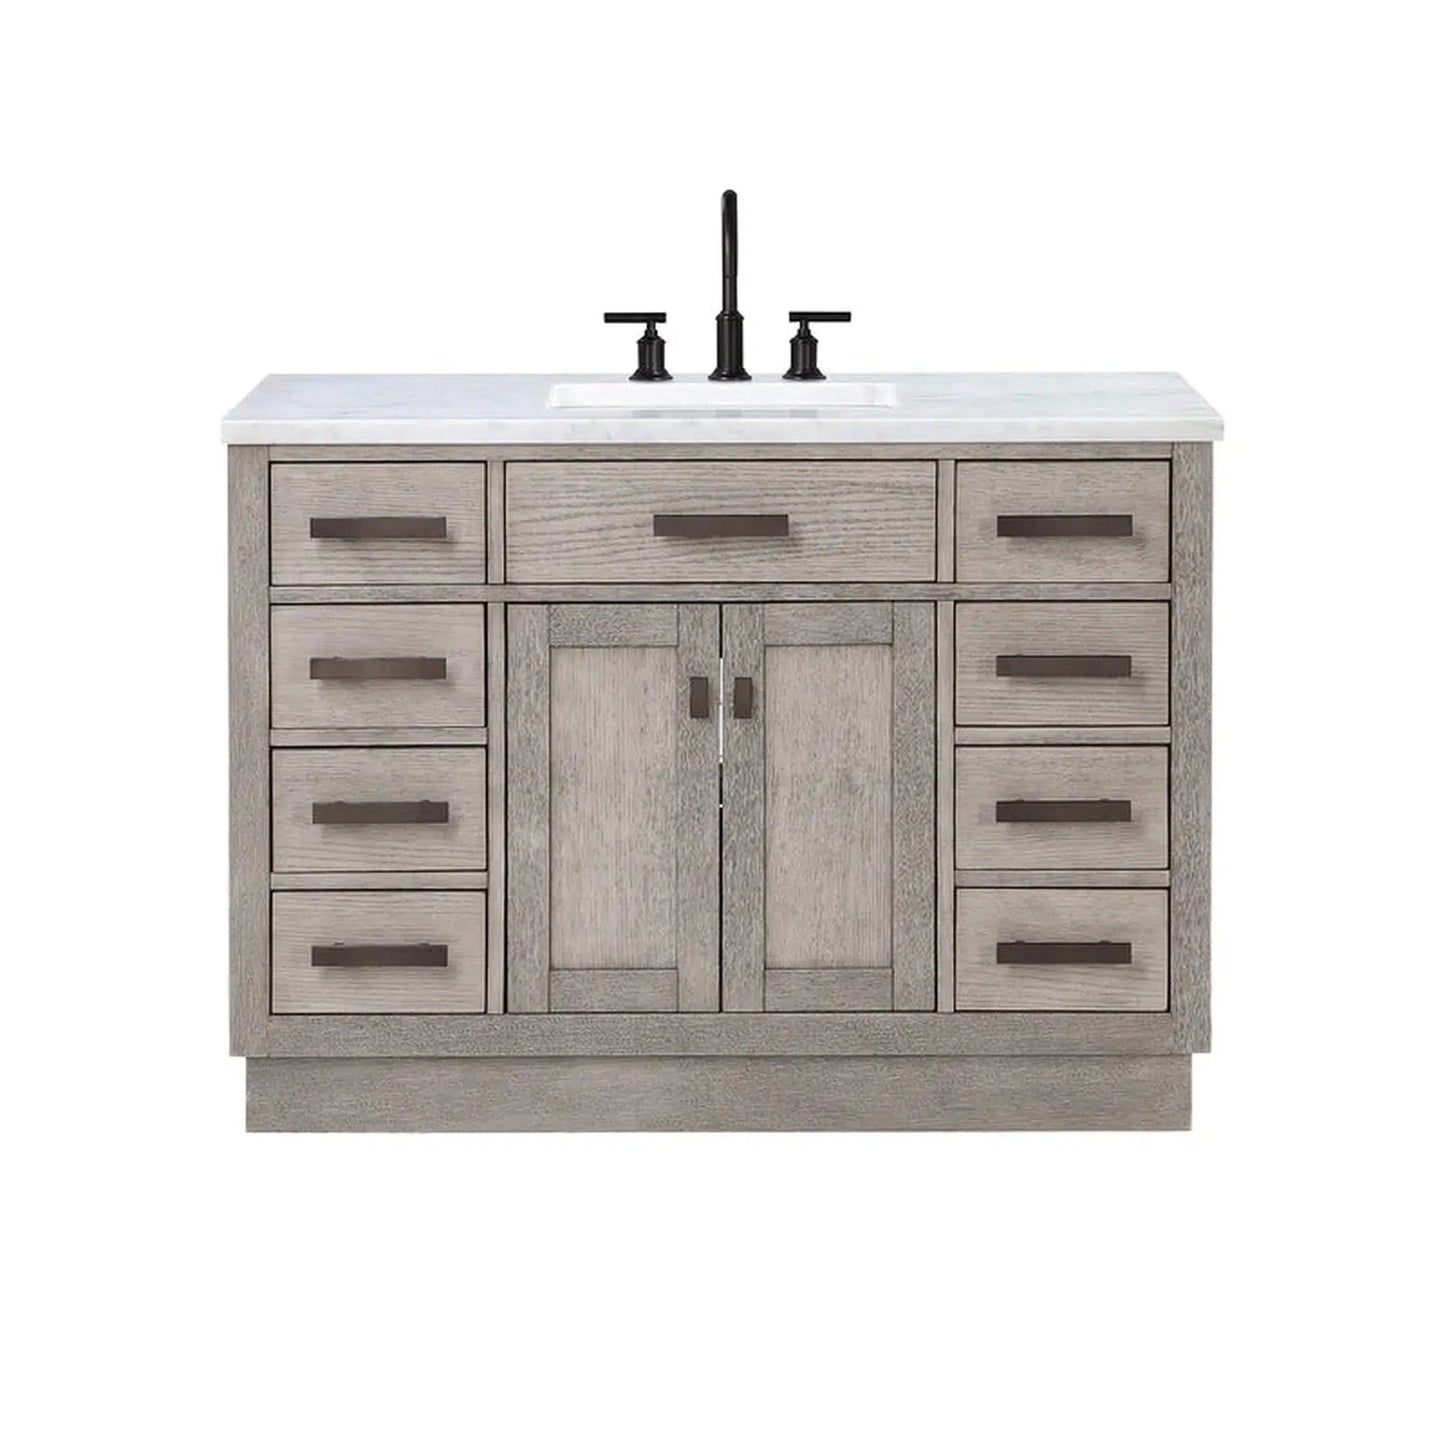 Water Creation Chestnut 48" Single Sink Carrara White Marble Countertop Vanity In Grey Oak with Grooseneck Faucet and Mirror